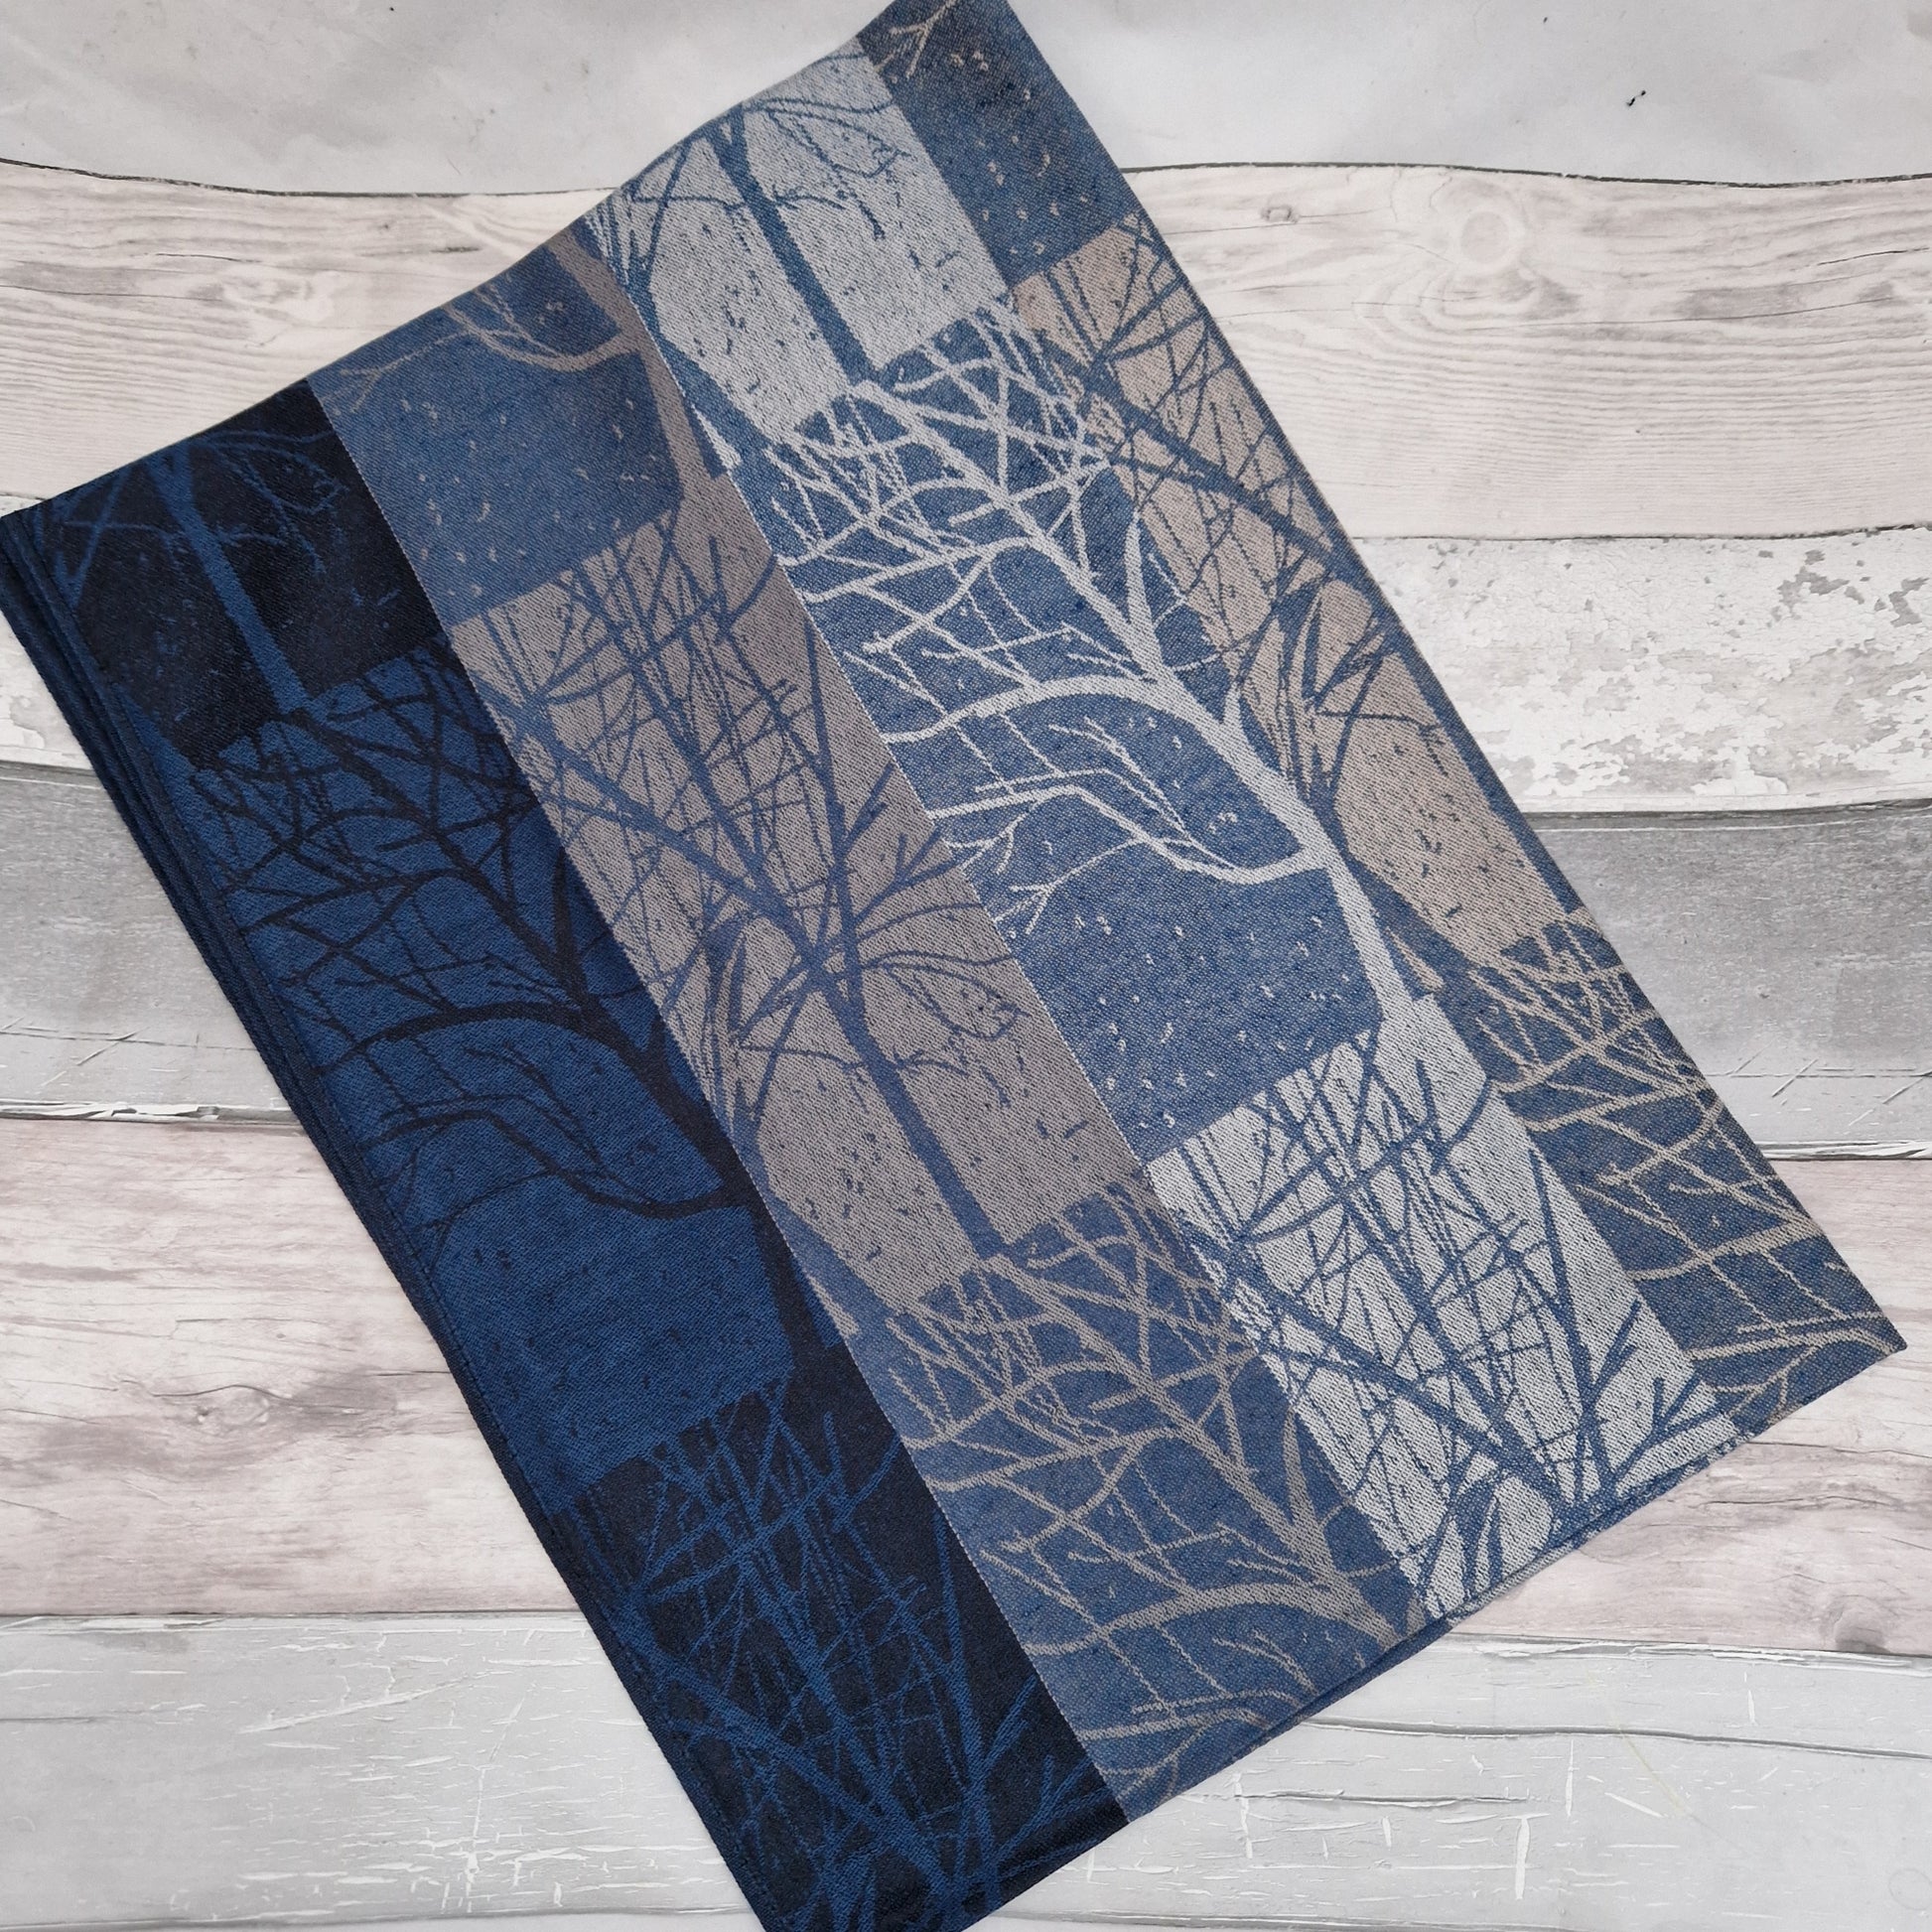 Wood Land forest scarf in blue, silver and bronze colours.